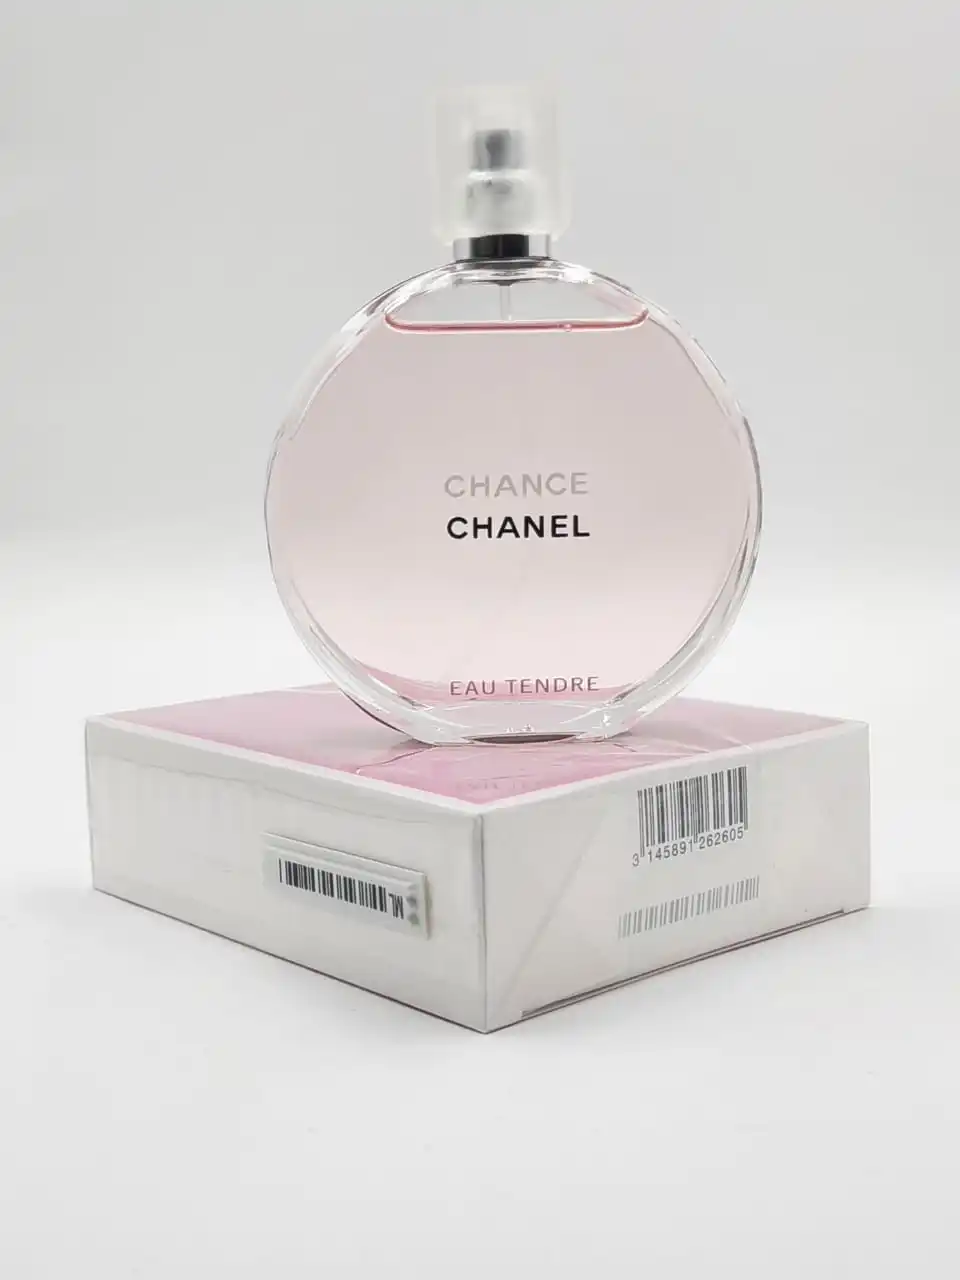 Why do you like Chanel? - Quora